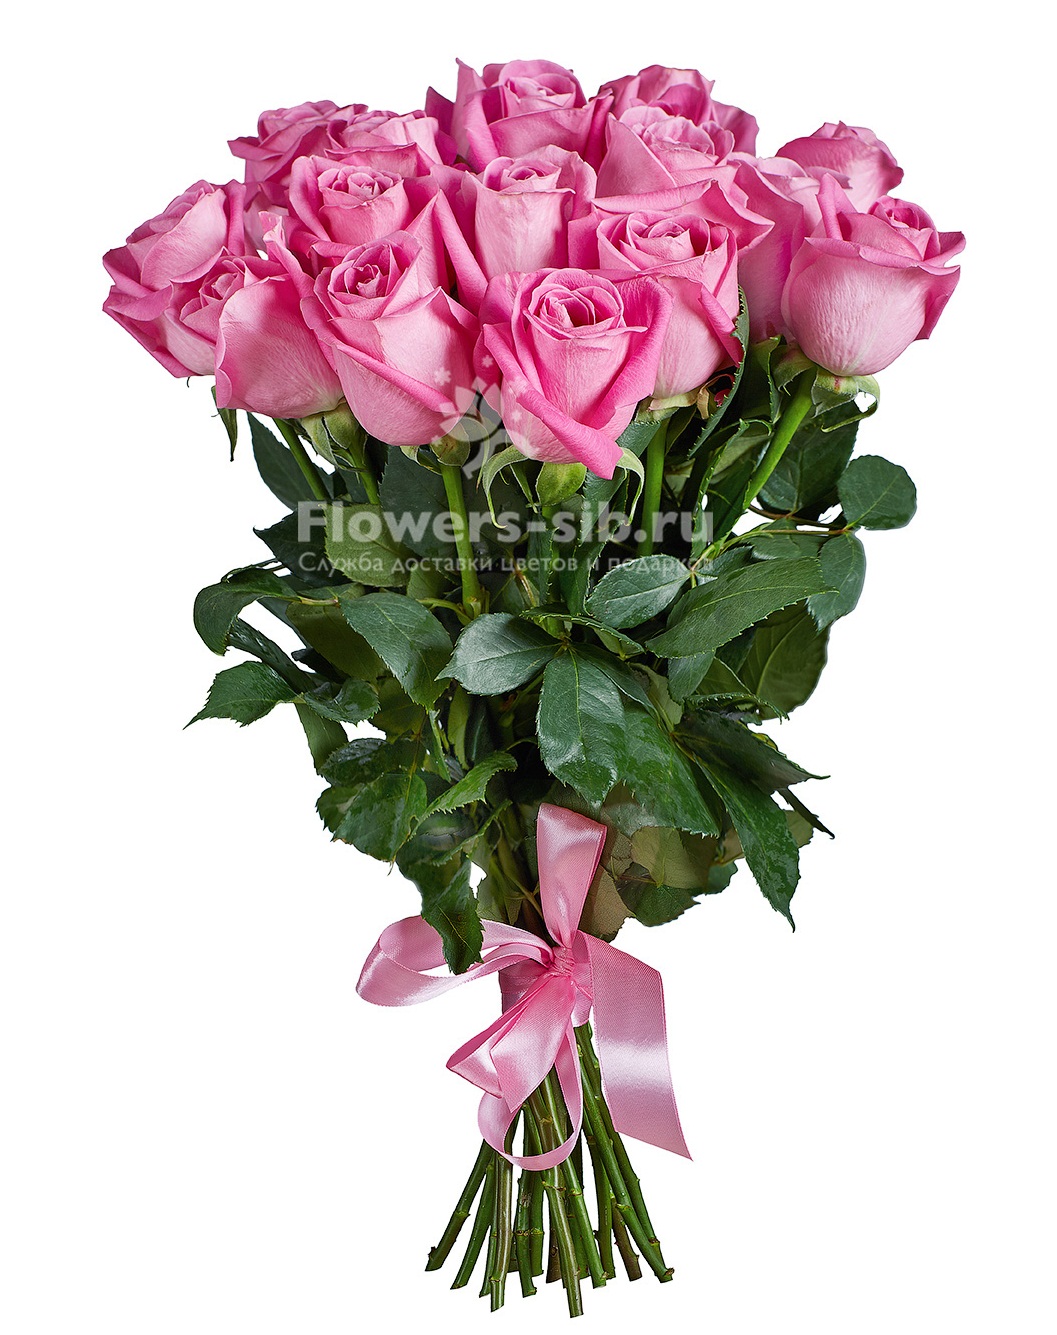 BOUQUET OF 17 ROSES